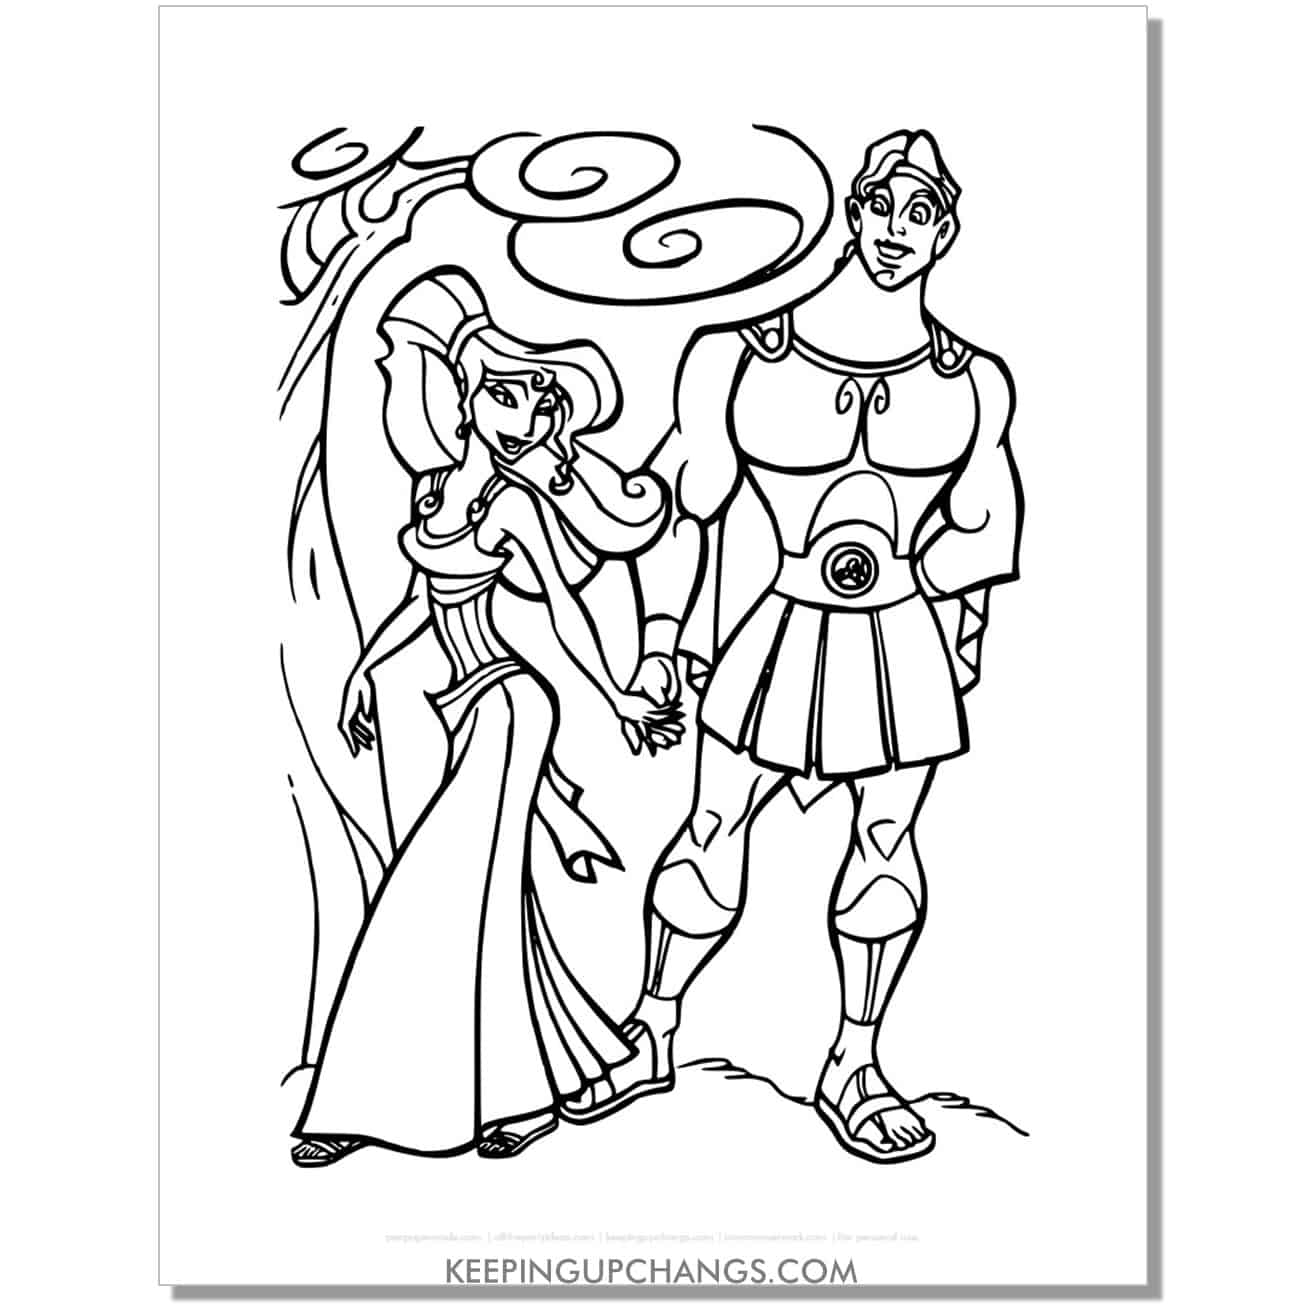 hercules holding meg's hand coloring page, sheet.